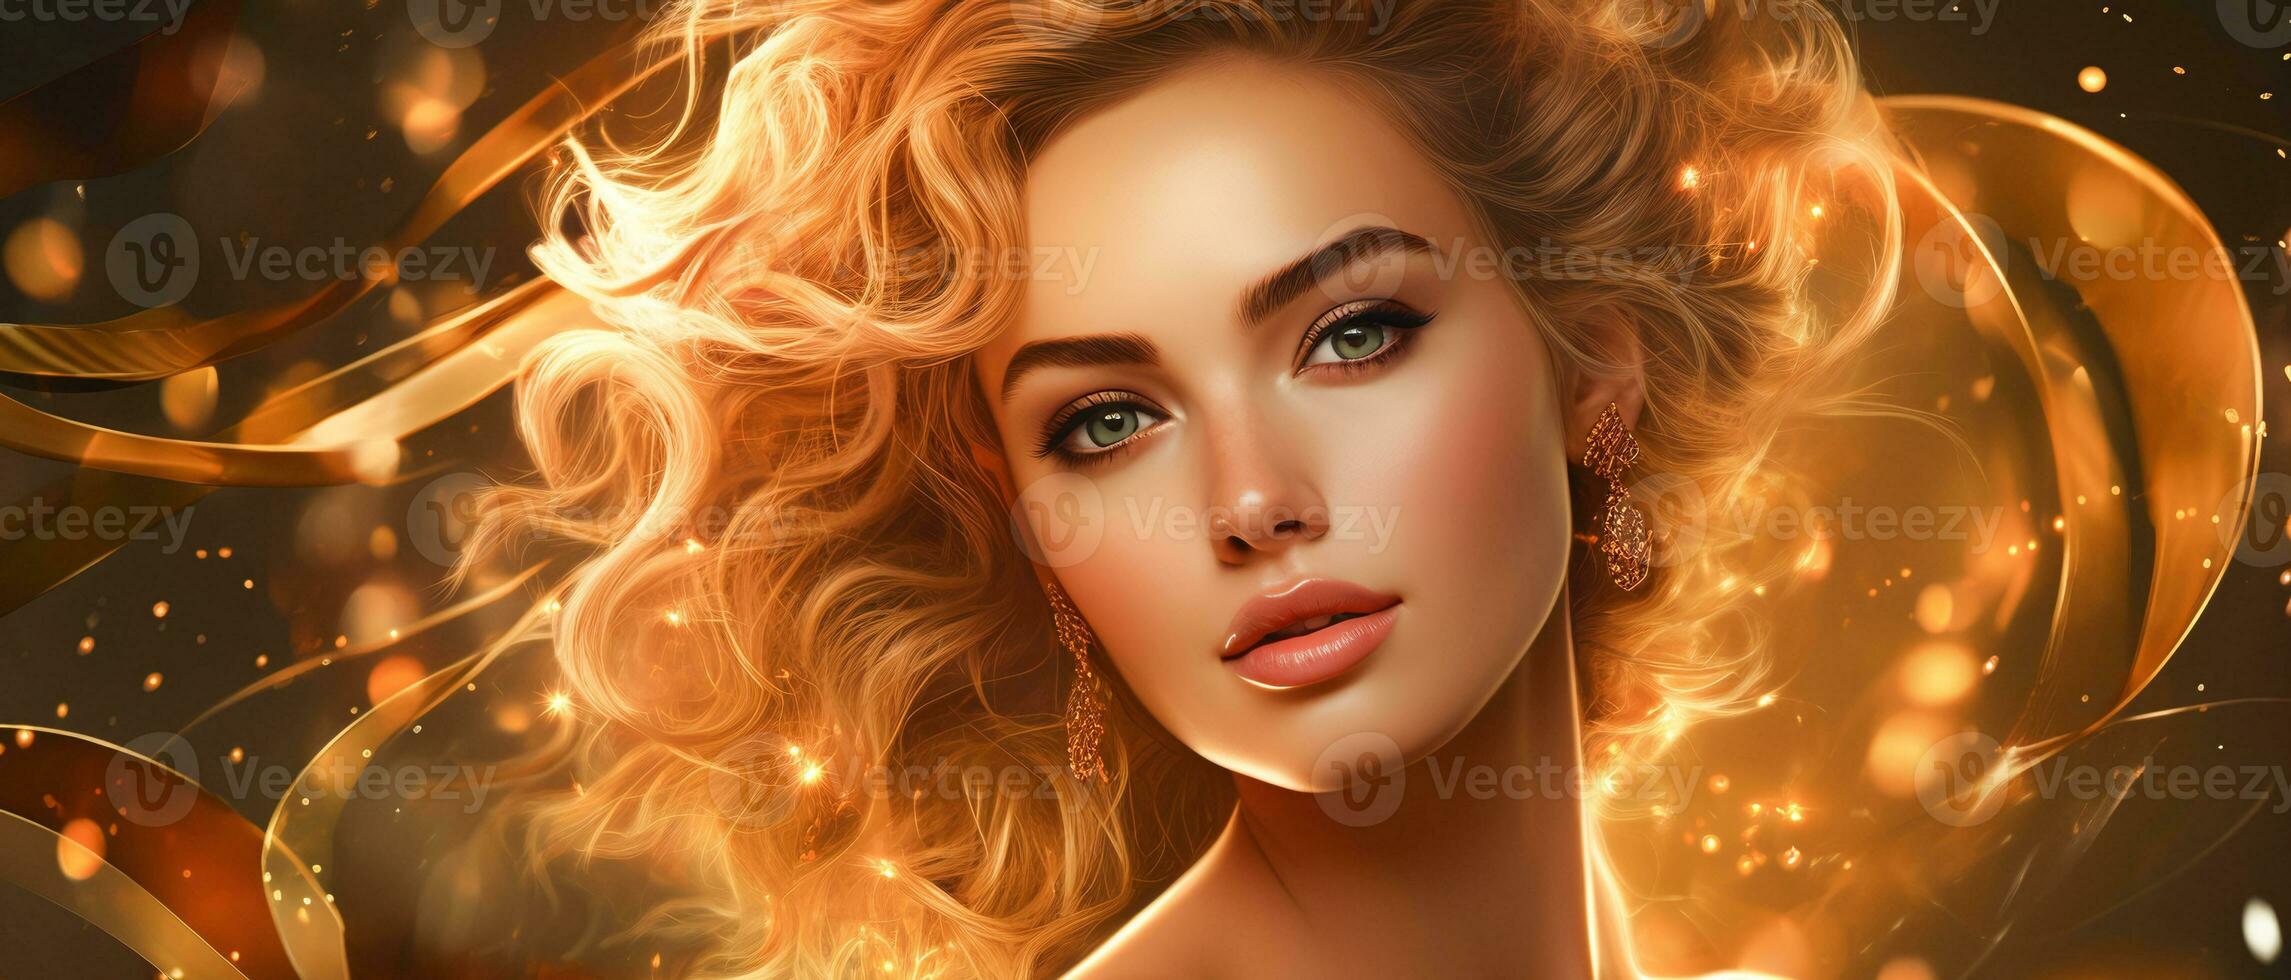 AI generated Banner Glamorous lady with flowing hair and golden earrings, perfect for fashion and glamour shots photo